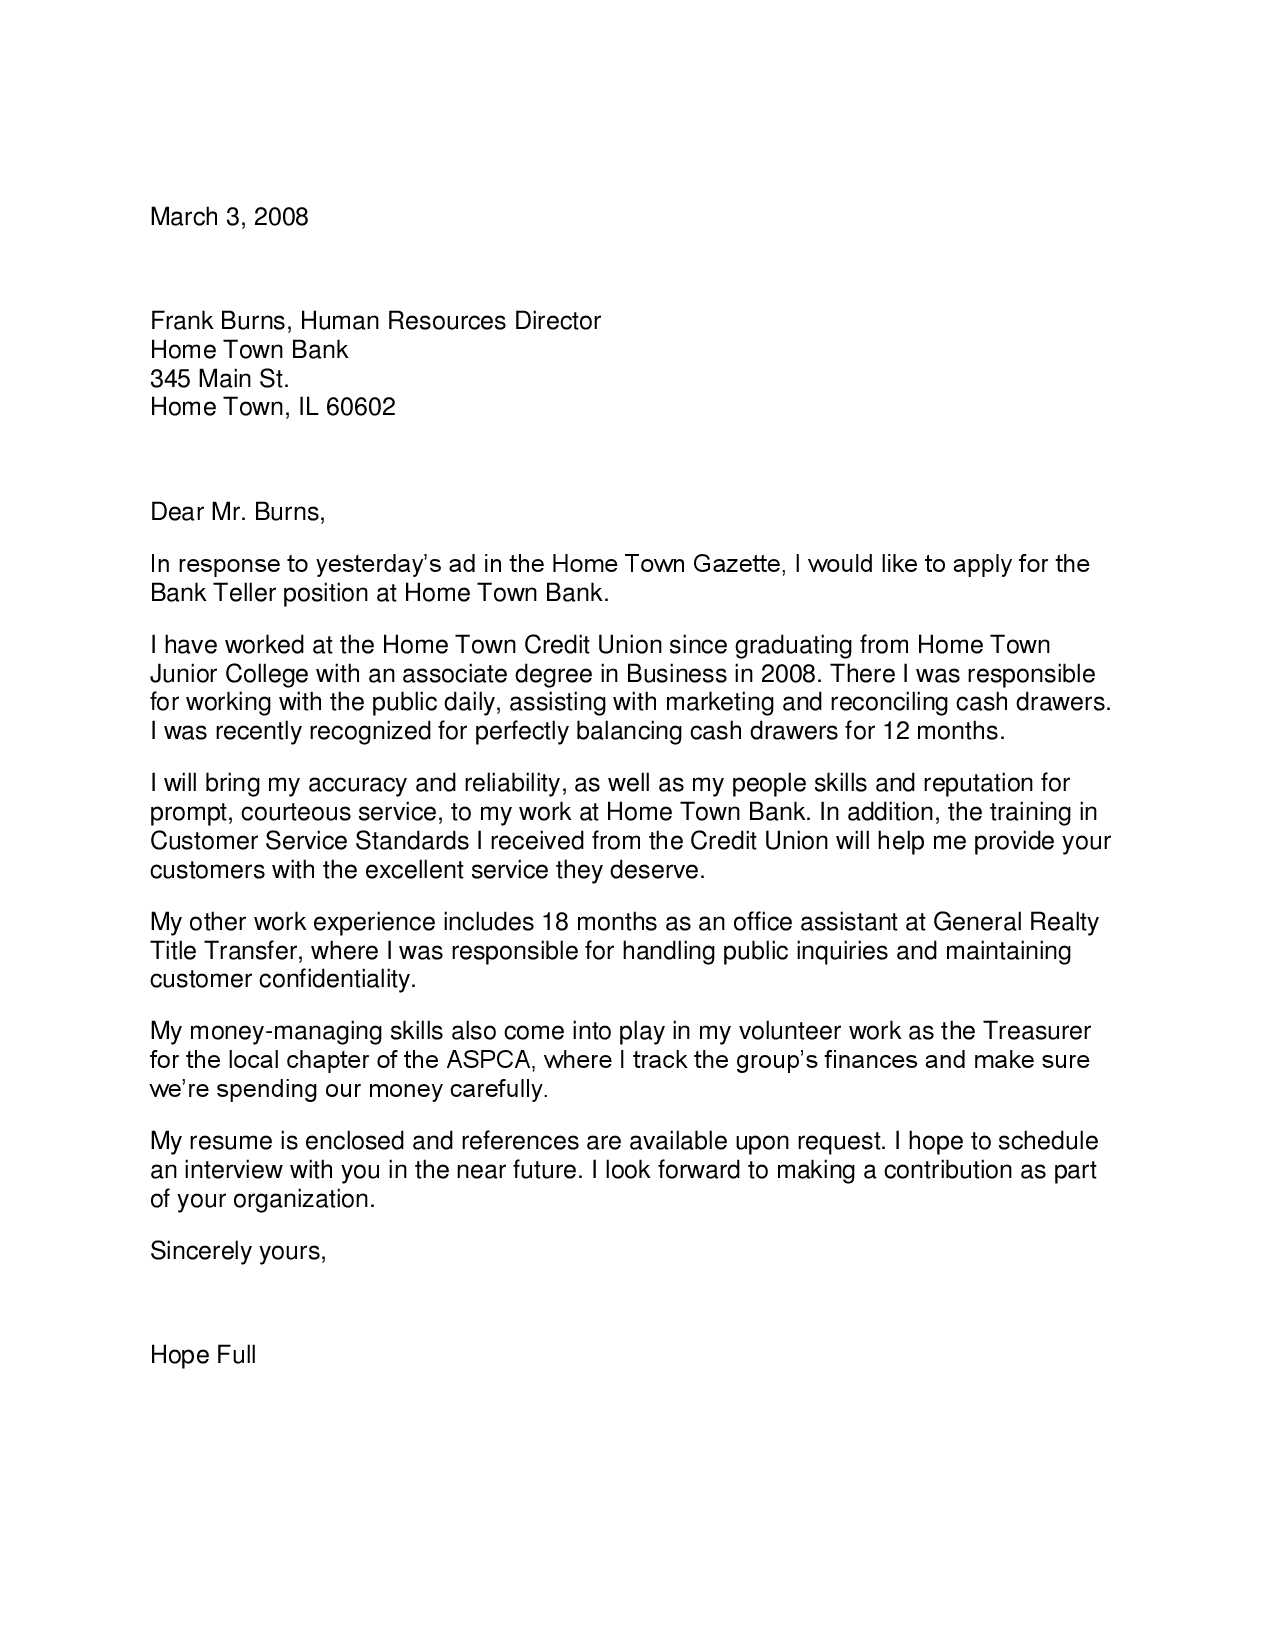 Bank Teller Cover Letter with No Experience